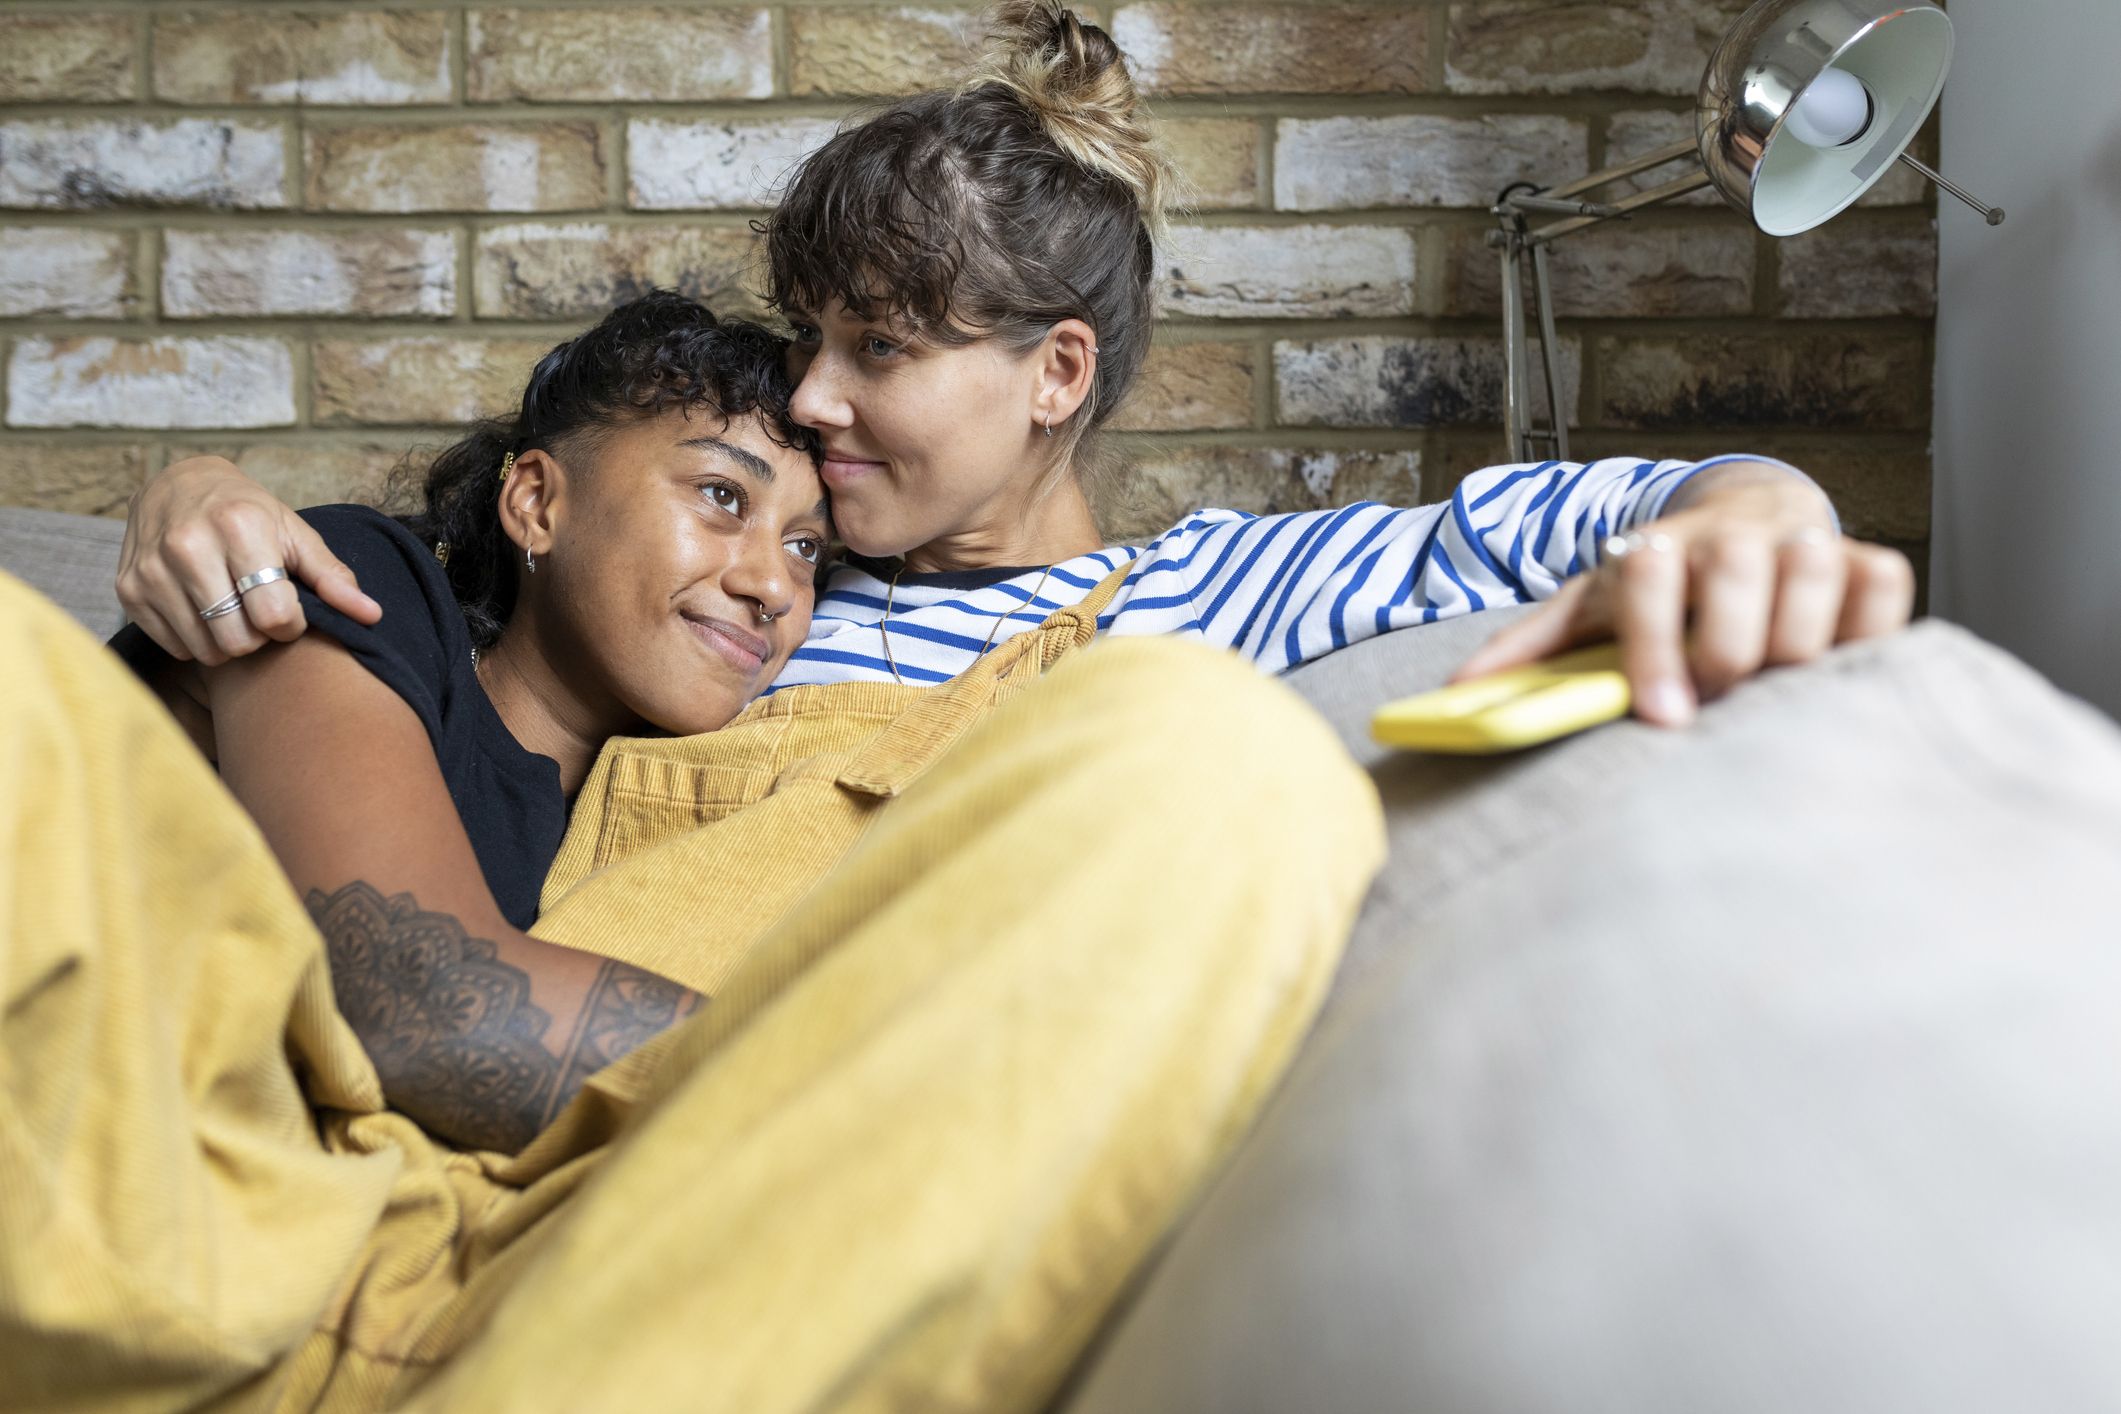 High School Lesbian Sex - Am I a lesbian? How to know if you're a lesbian